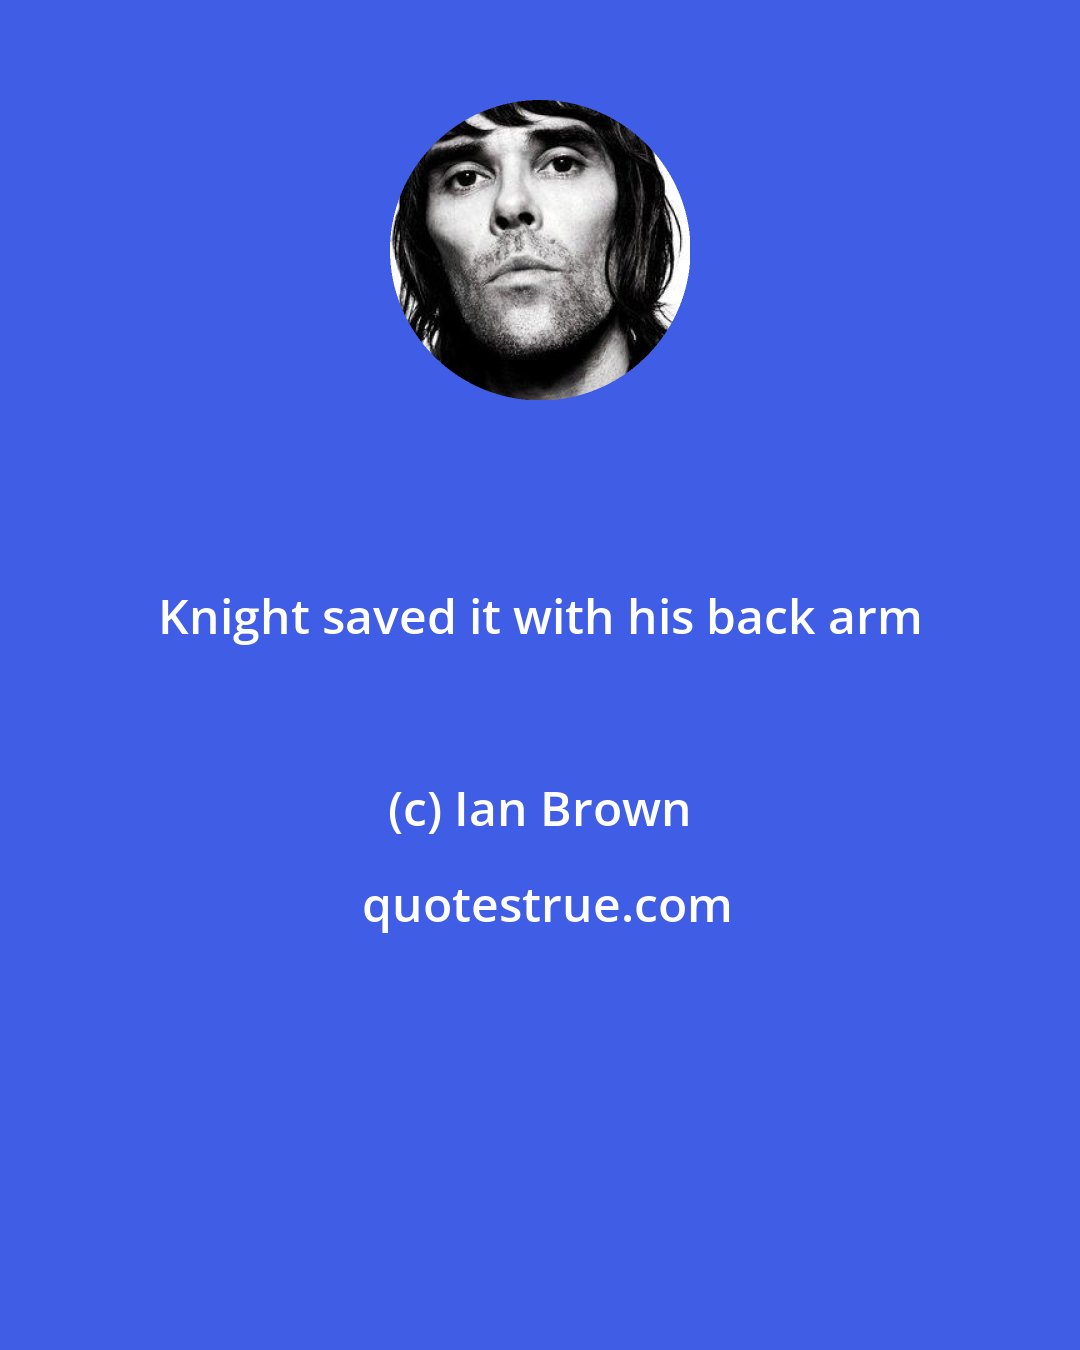 Ian Brown: Knight saved it with his back arm